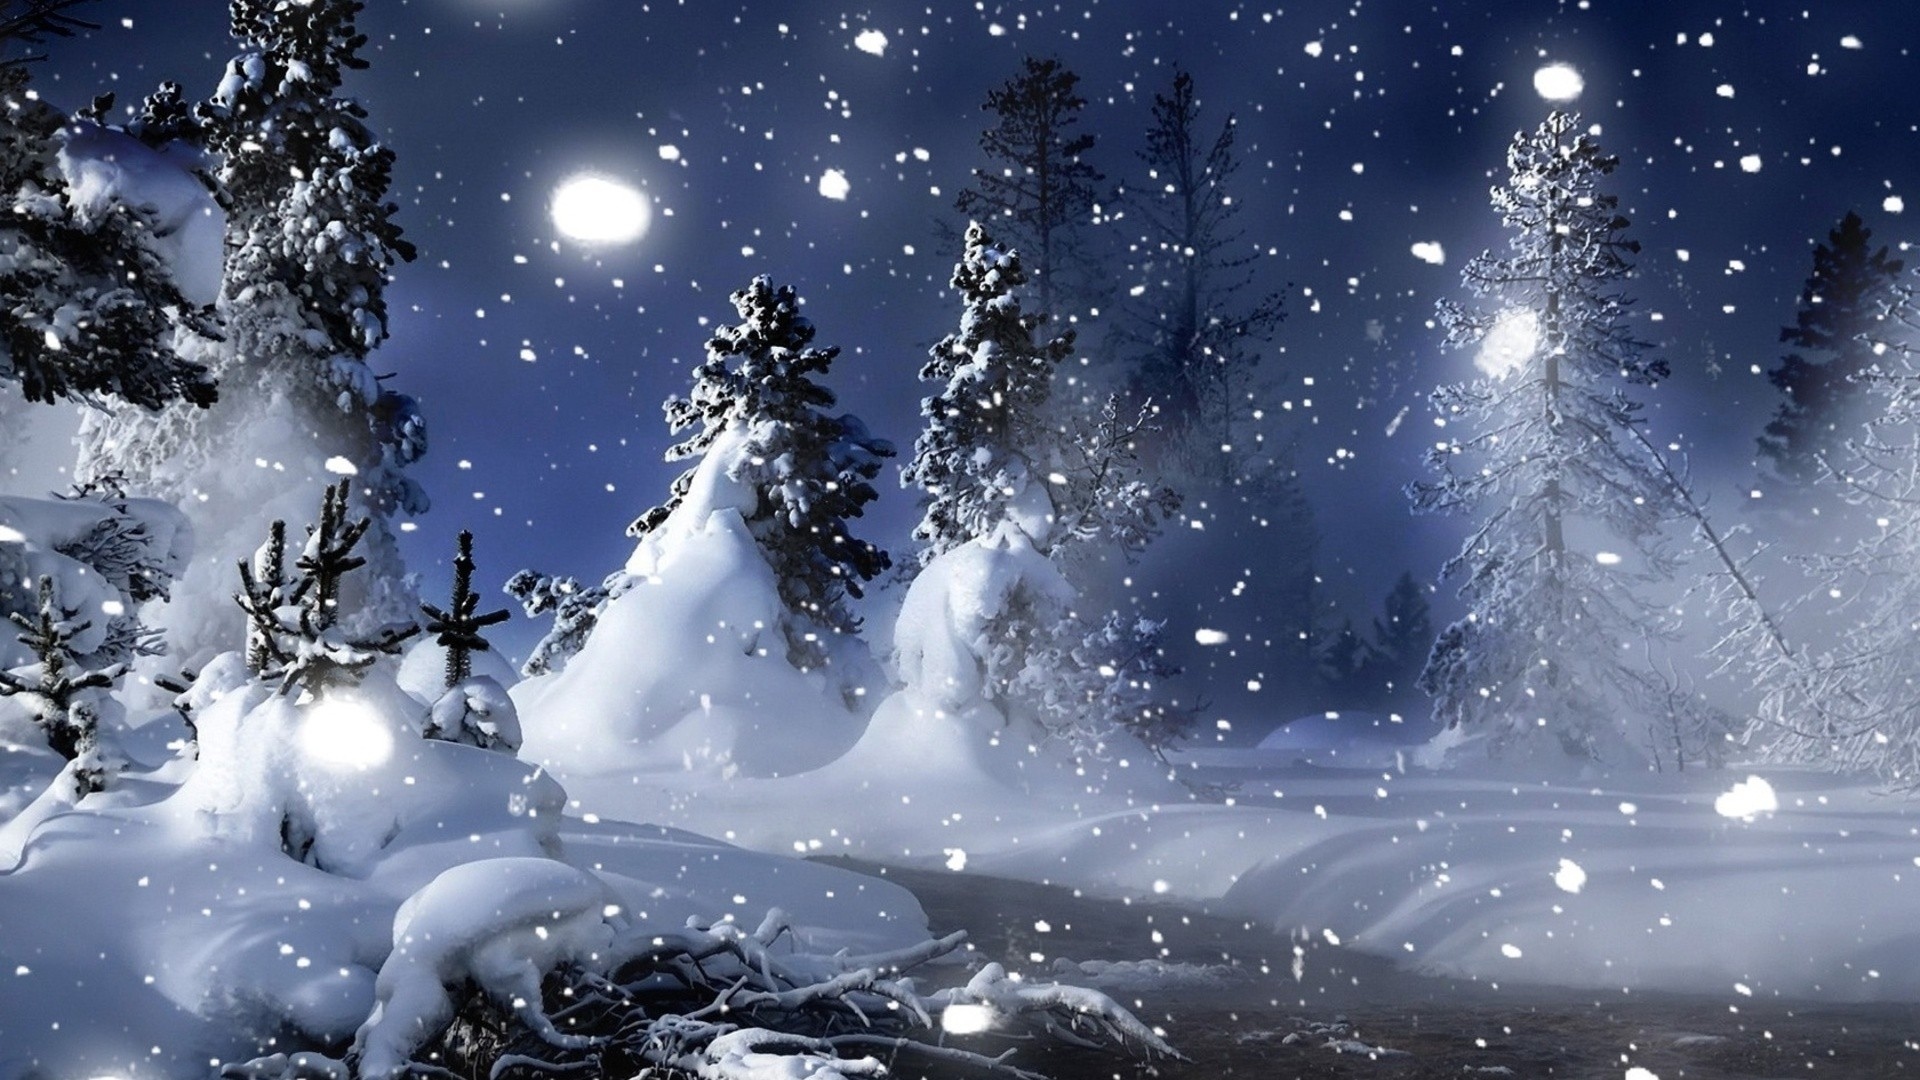 Xmas Trees Snowing Snowflakes Wallpaper - Cold Winter Night , HD Wallpaper & Backgrounds